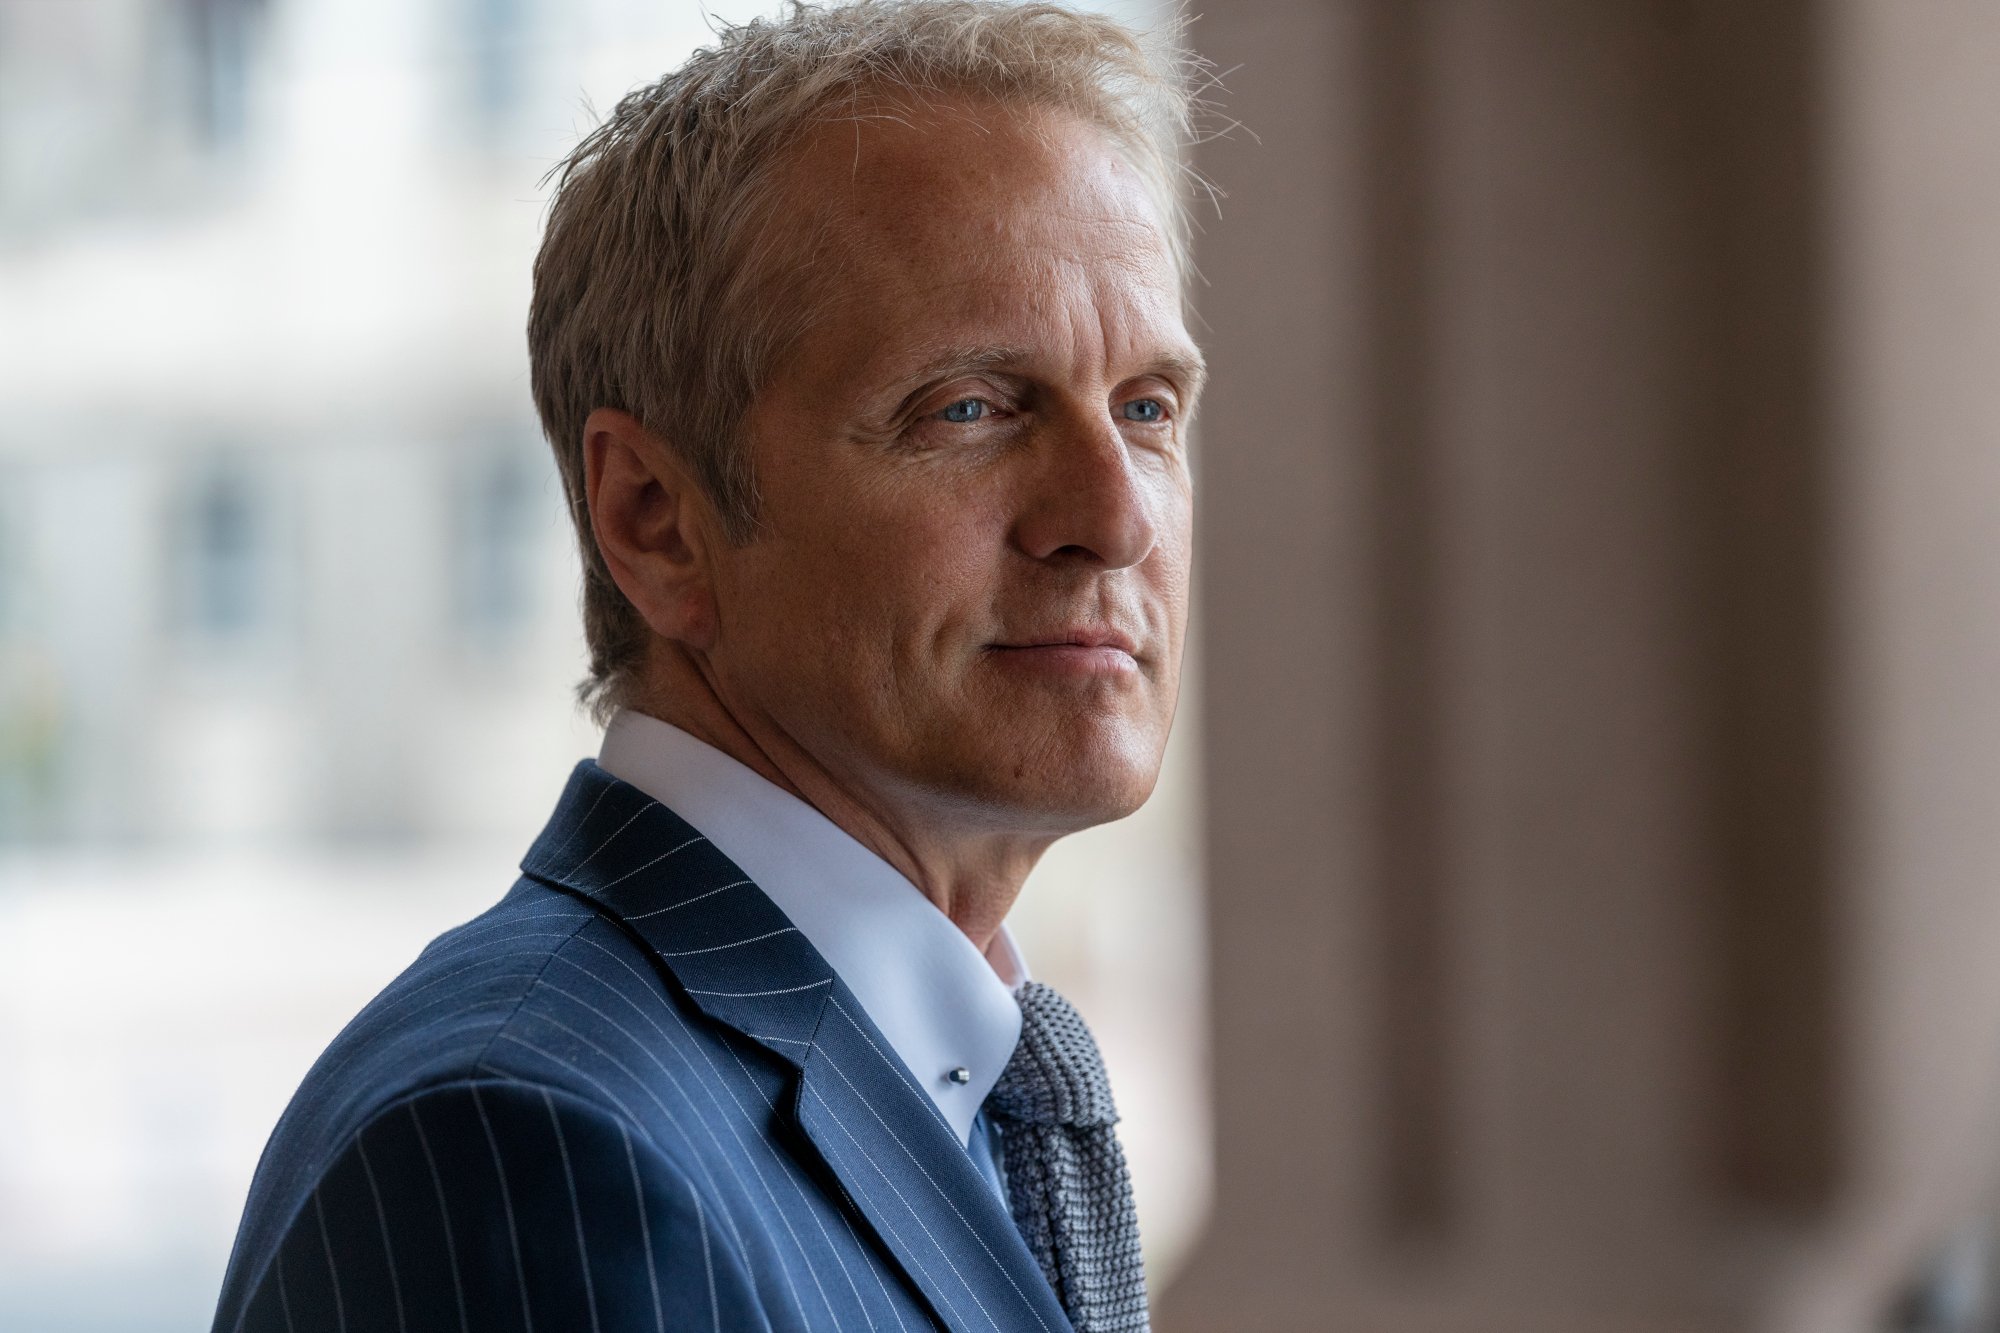 Patrick Fabian as Howard Hamlin in 'Better Call Saul' - He's wearing a blue suit and standing in front of a window